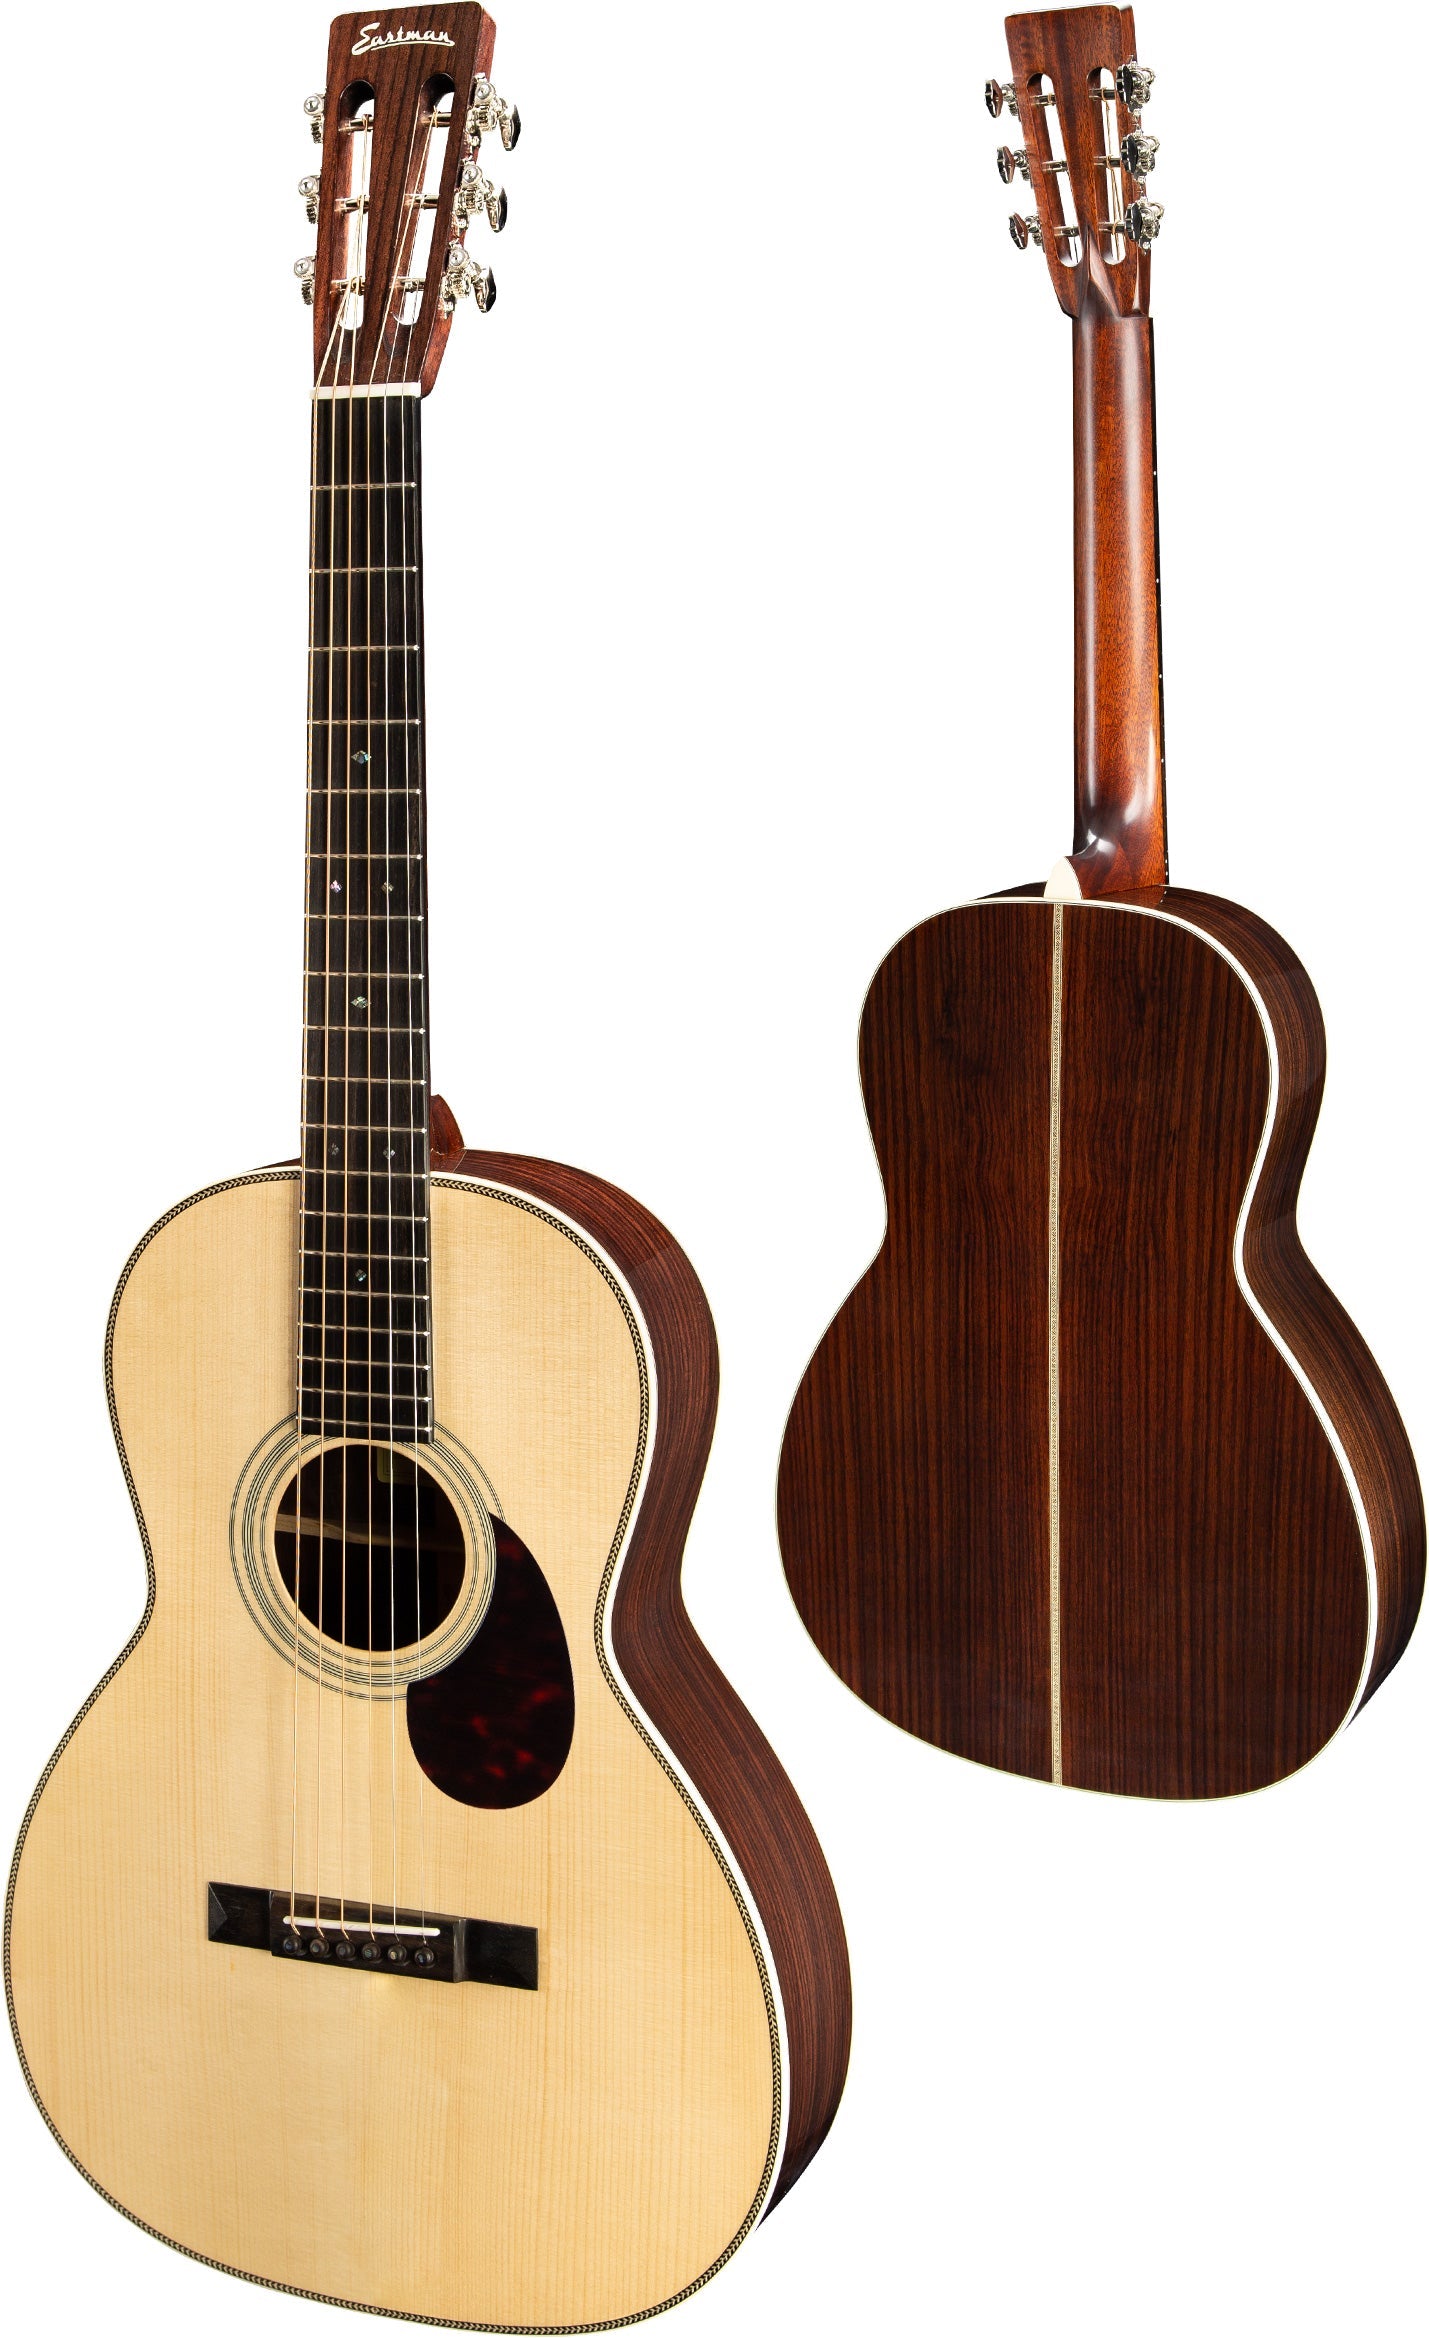 Eastman E20OO, Acoustic Guitar for sale at Richards Guitars.